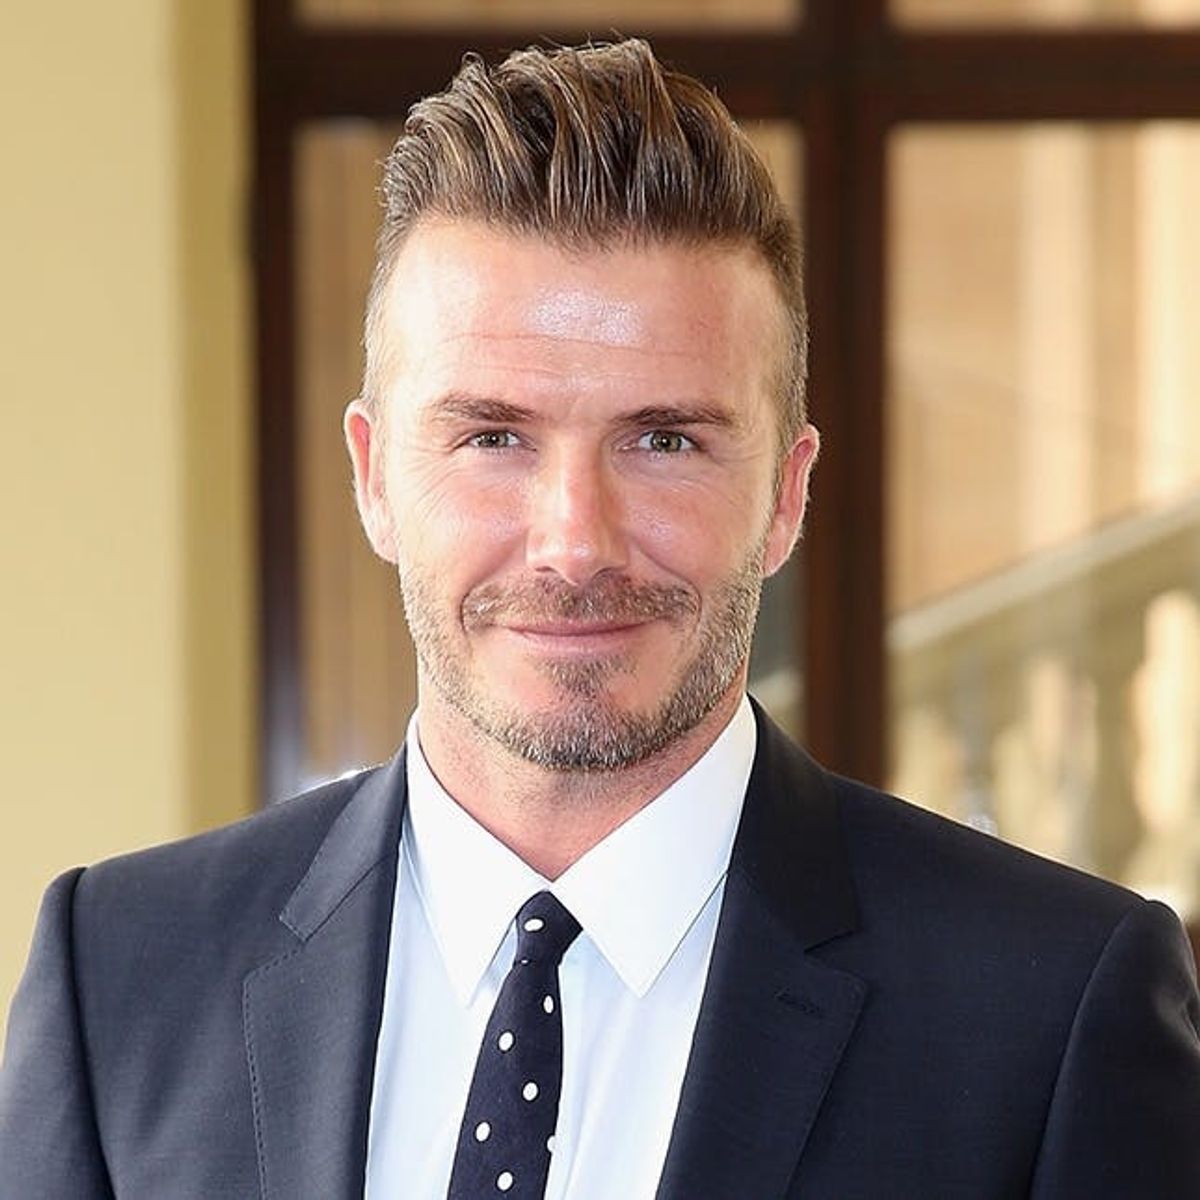 You’ll Never Guess Who’s Twinning With David Beckham